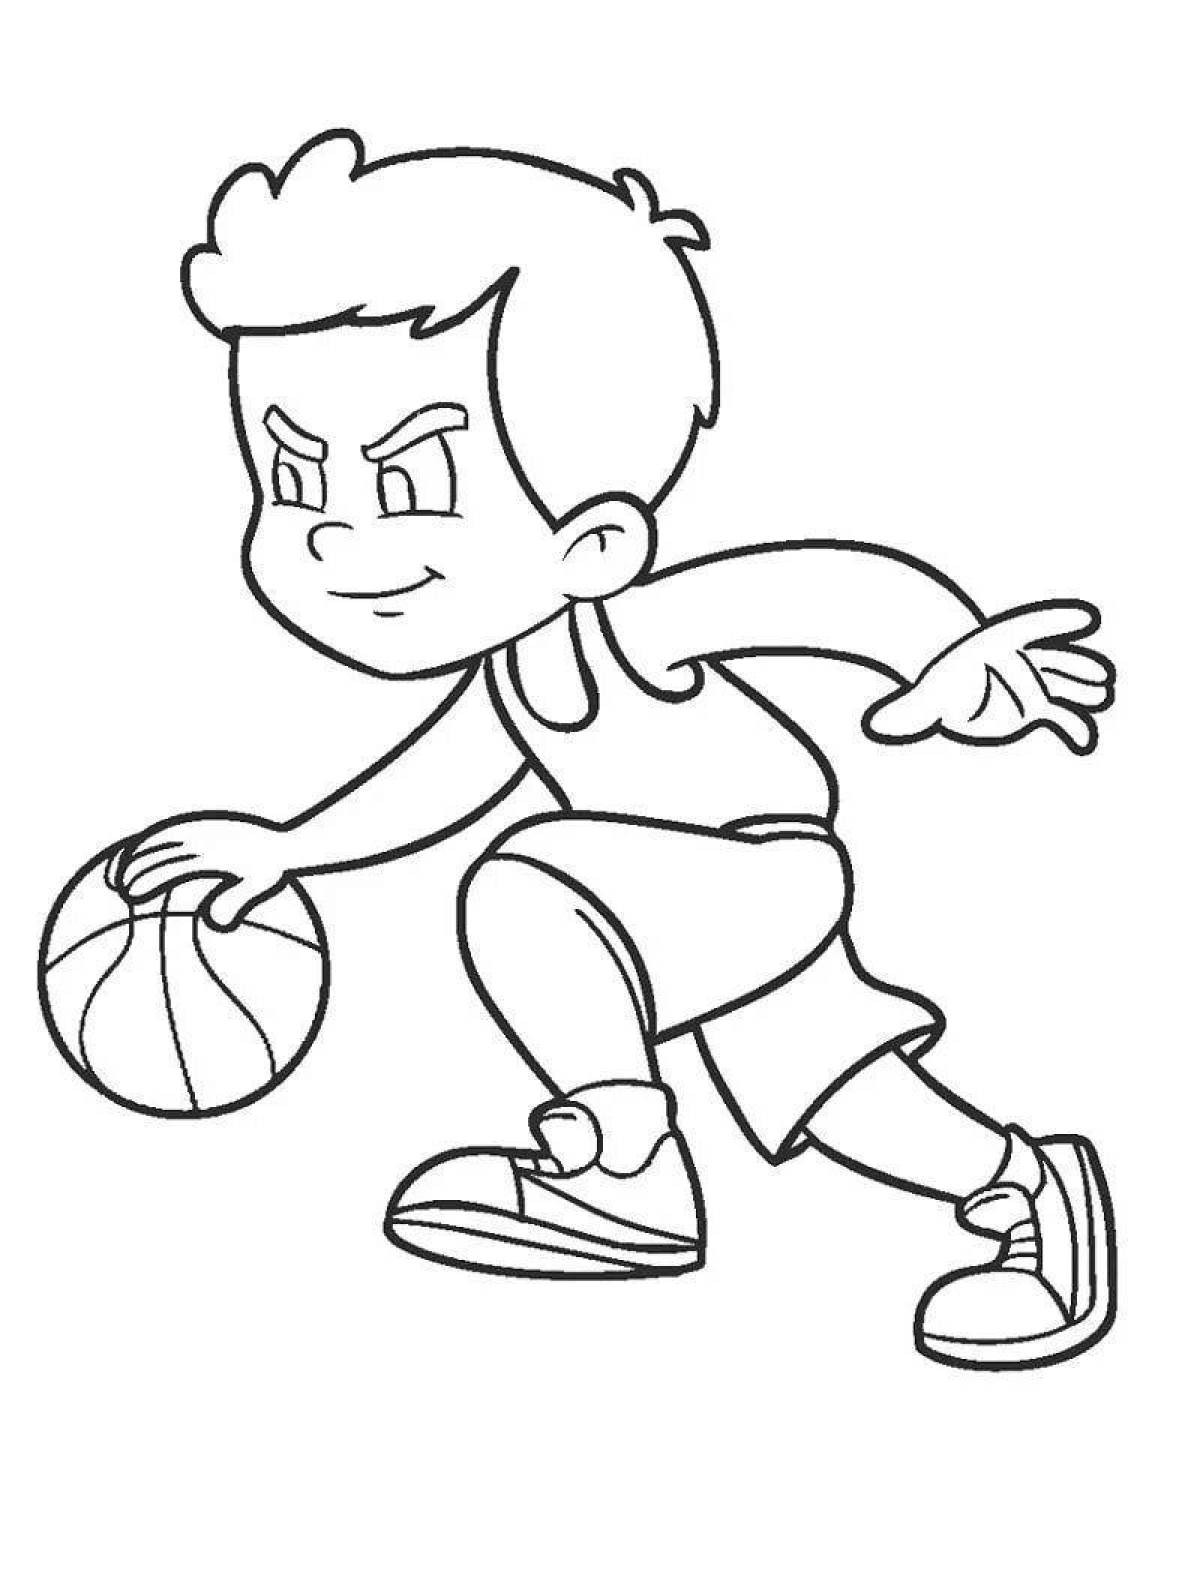 Incredible sports coloring book for 4-5 year olds